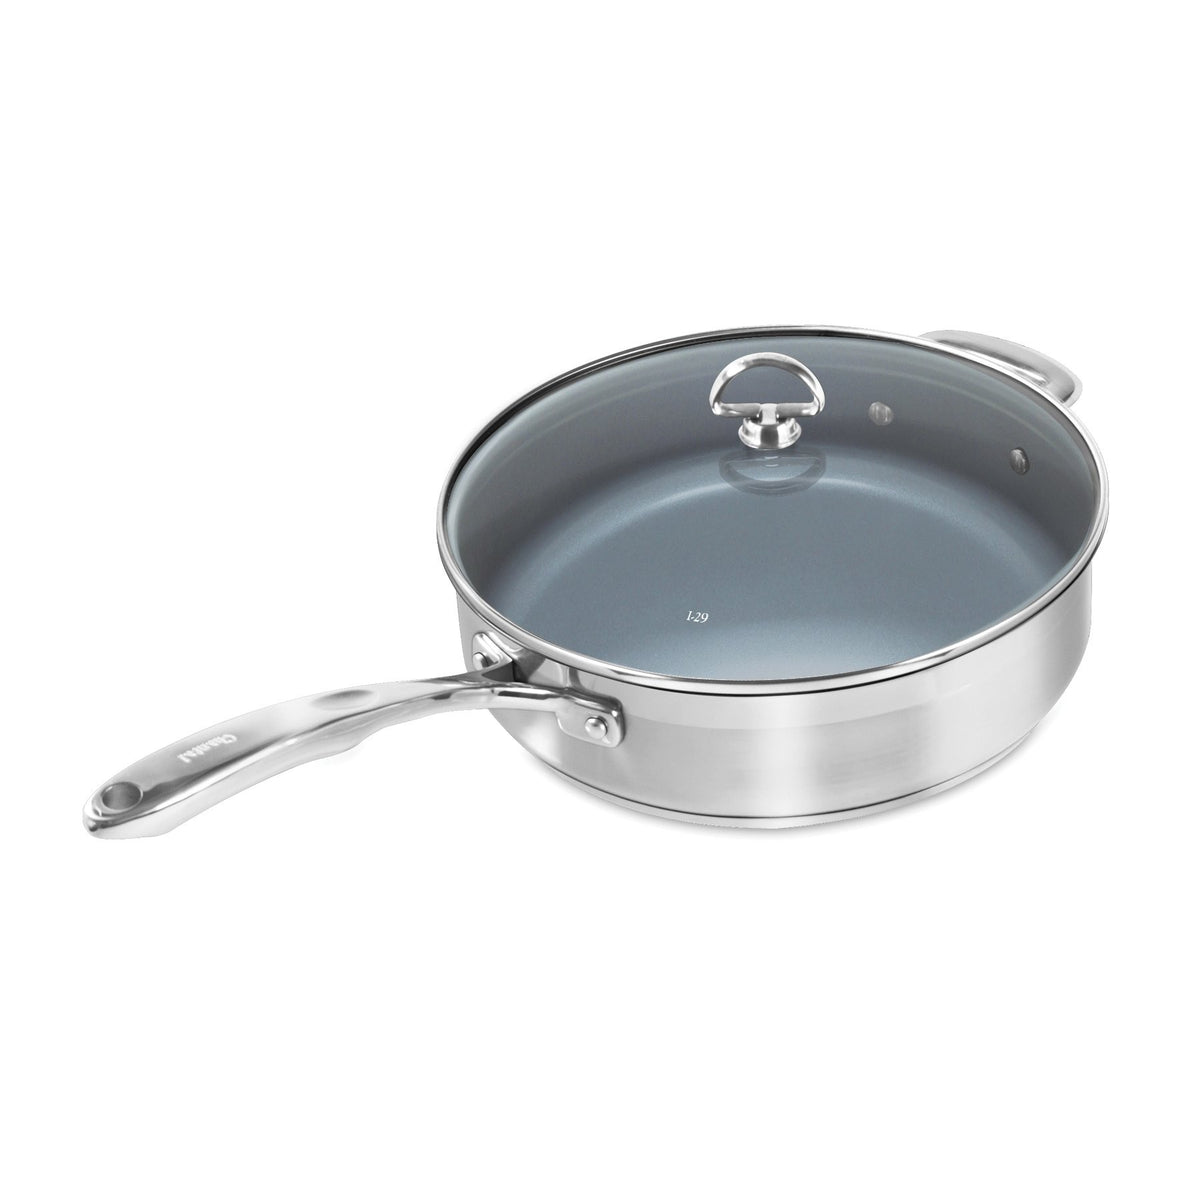 Induction 21 Steel Ceramic Coated Saute Skillet with Lid (5 Qt.)